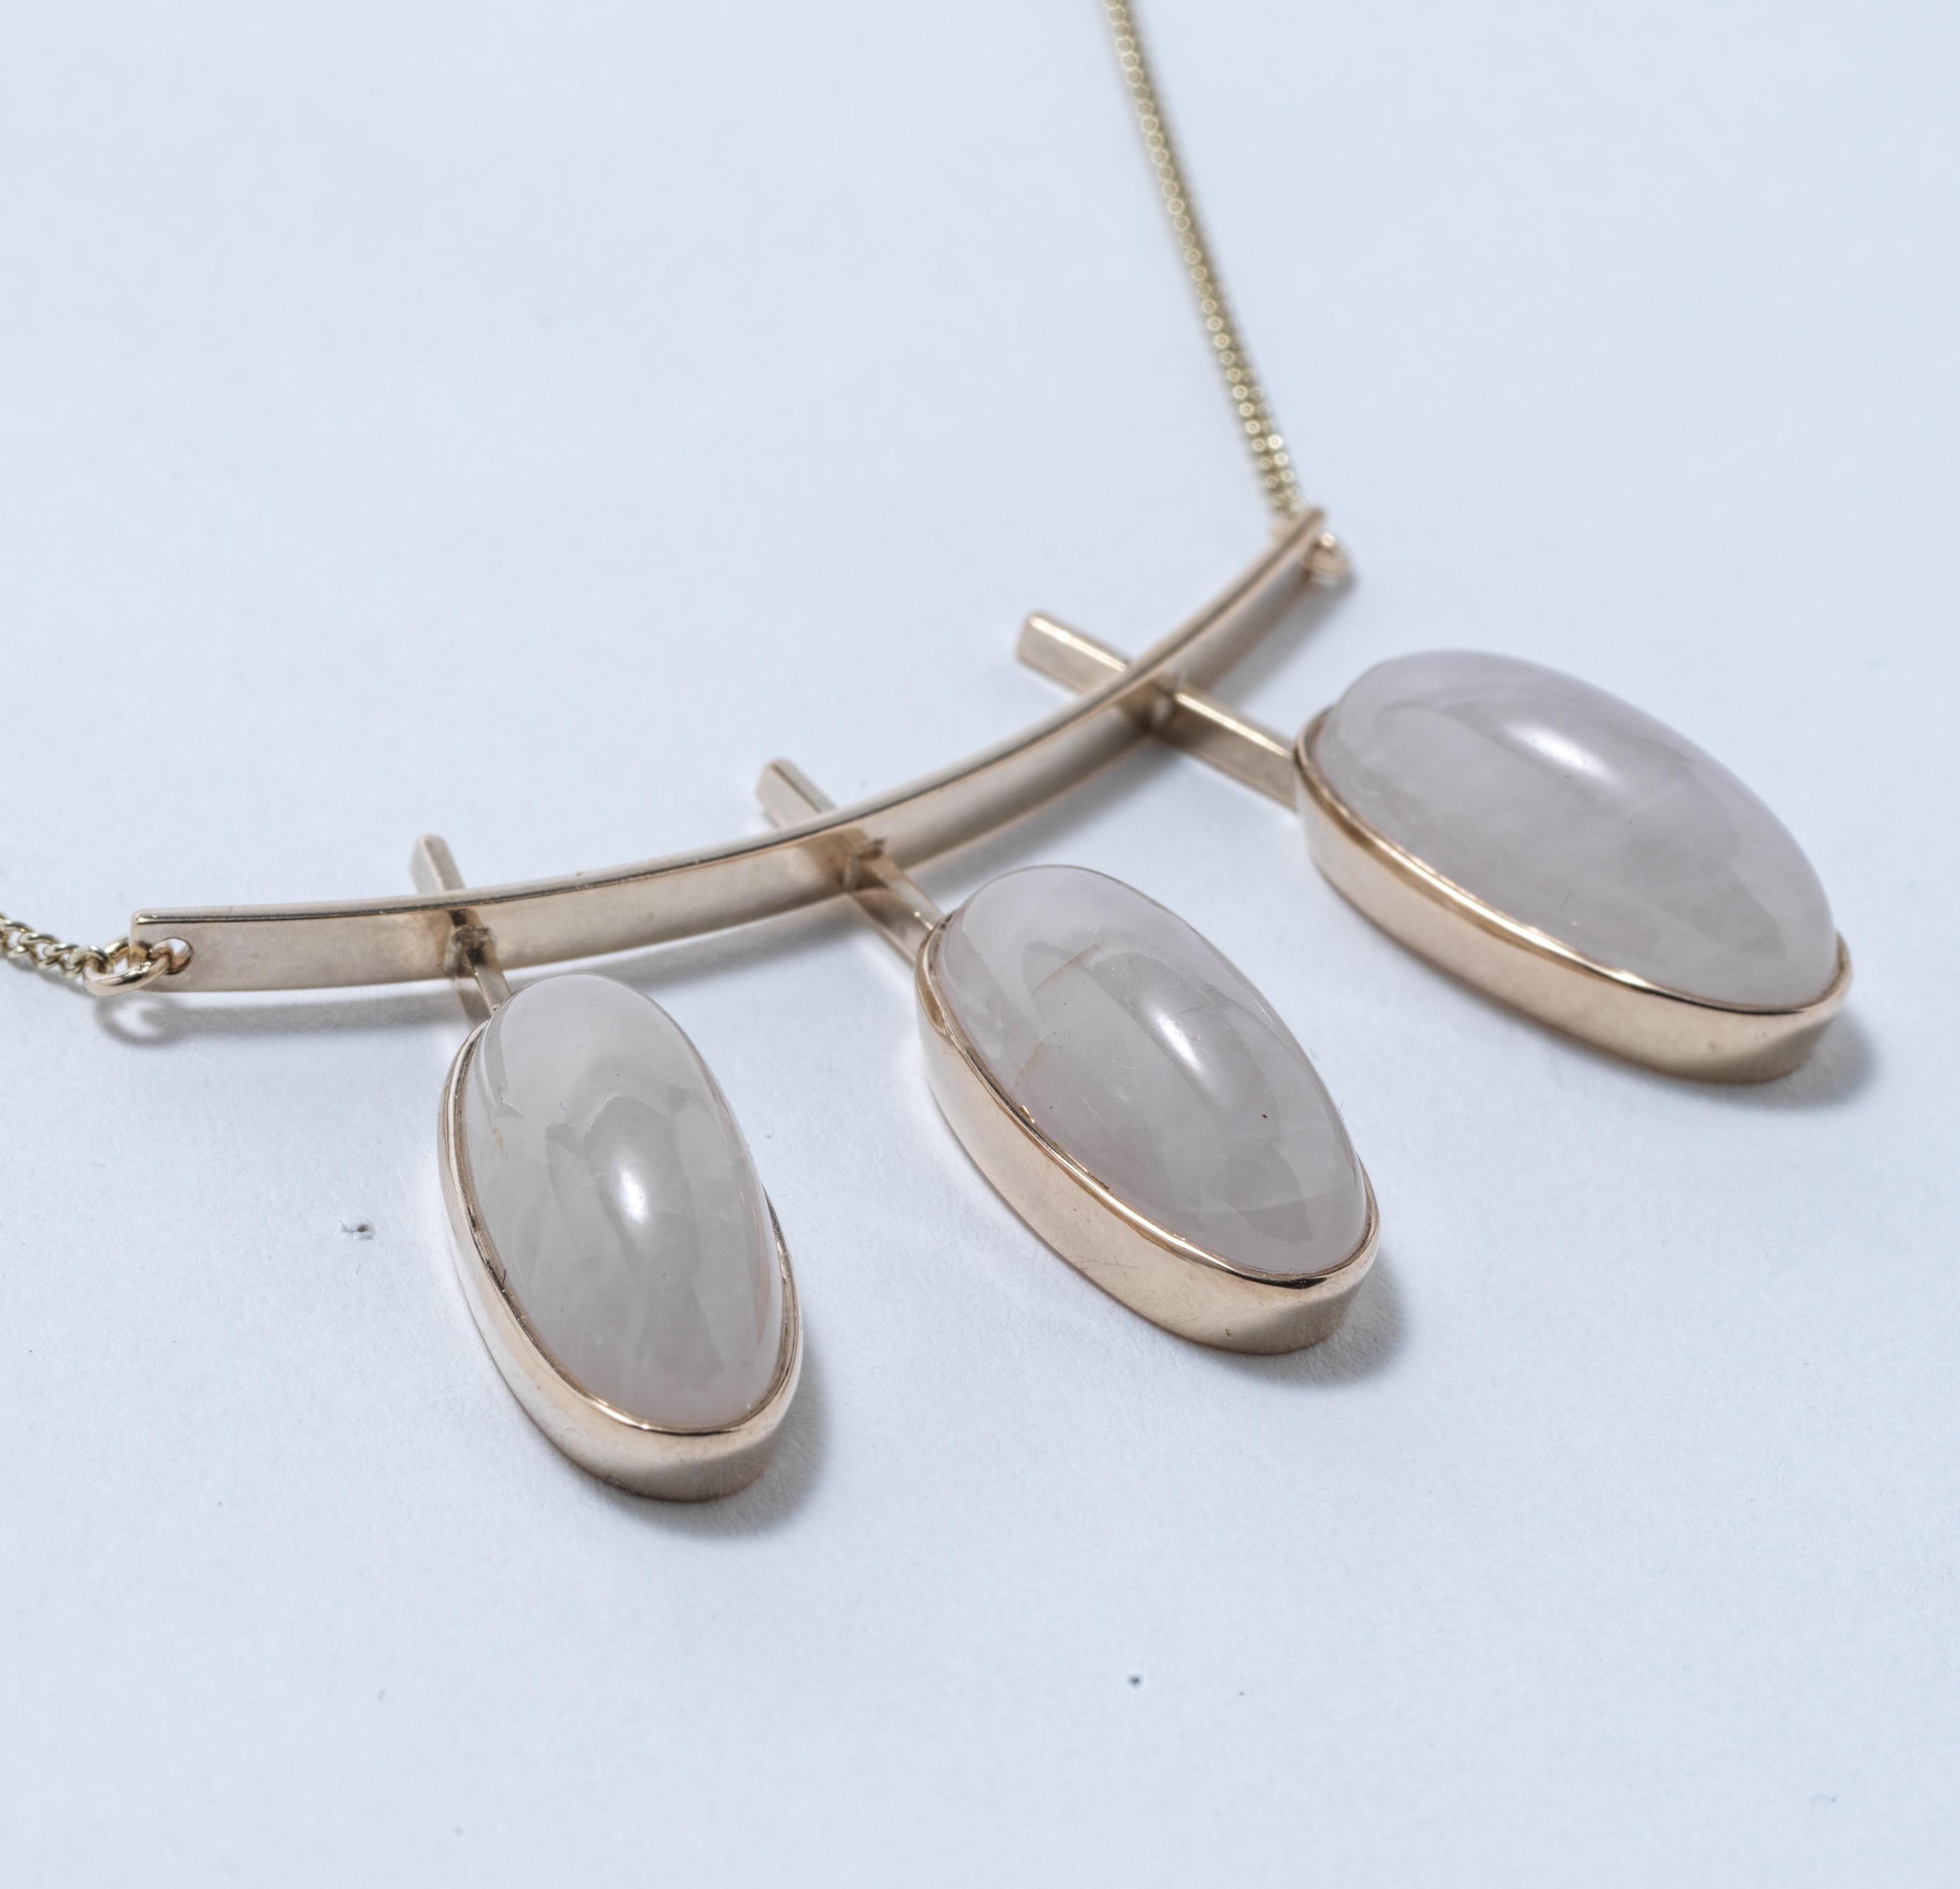 Cabochon Vintage gold necklace with milk quartz stones made 1959 in Finland. For Sale